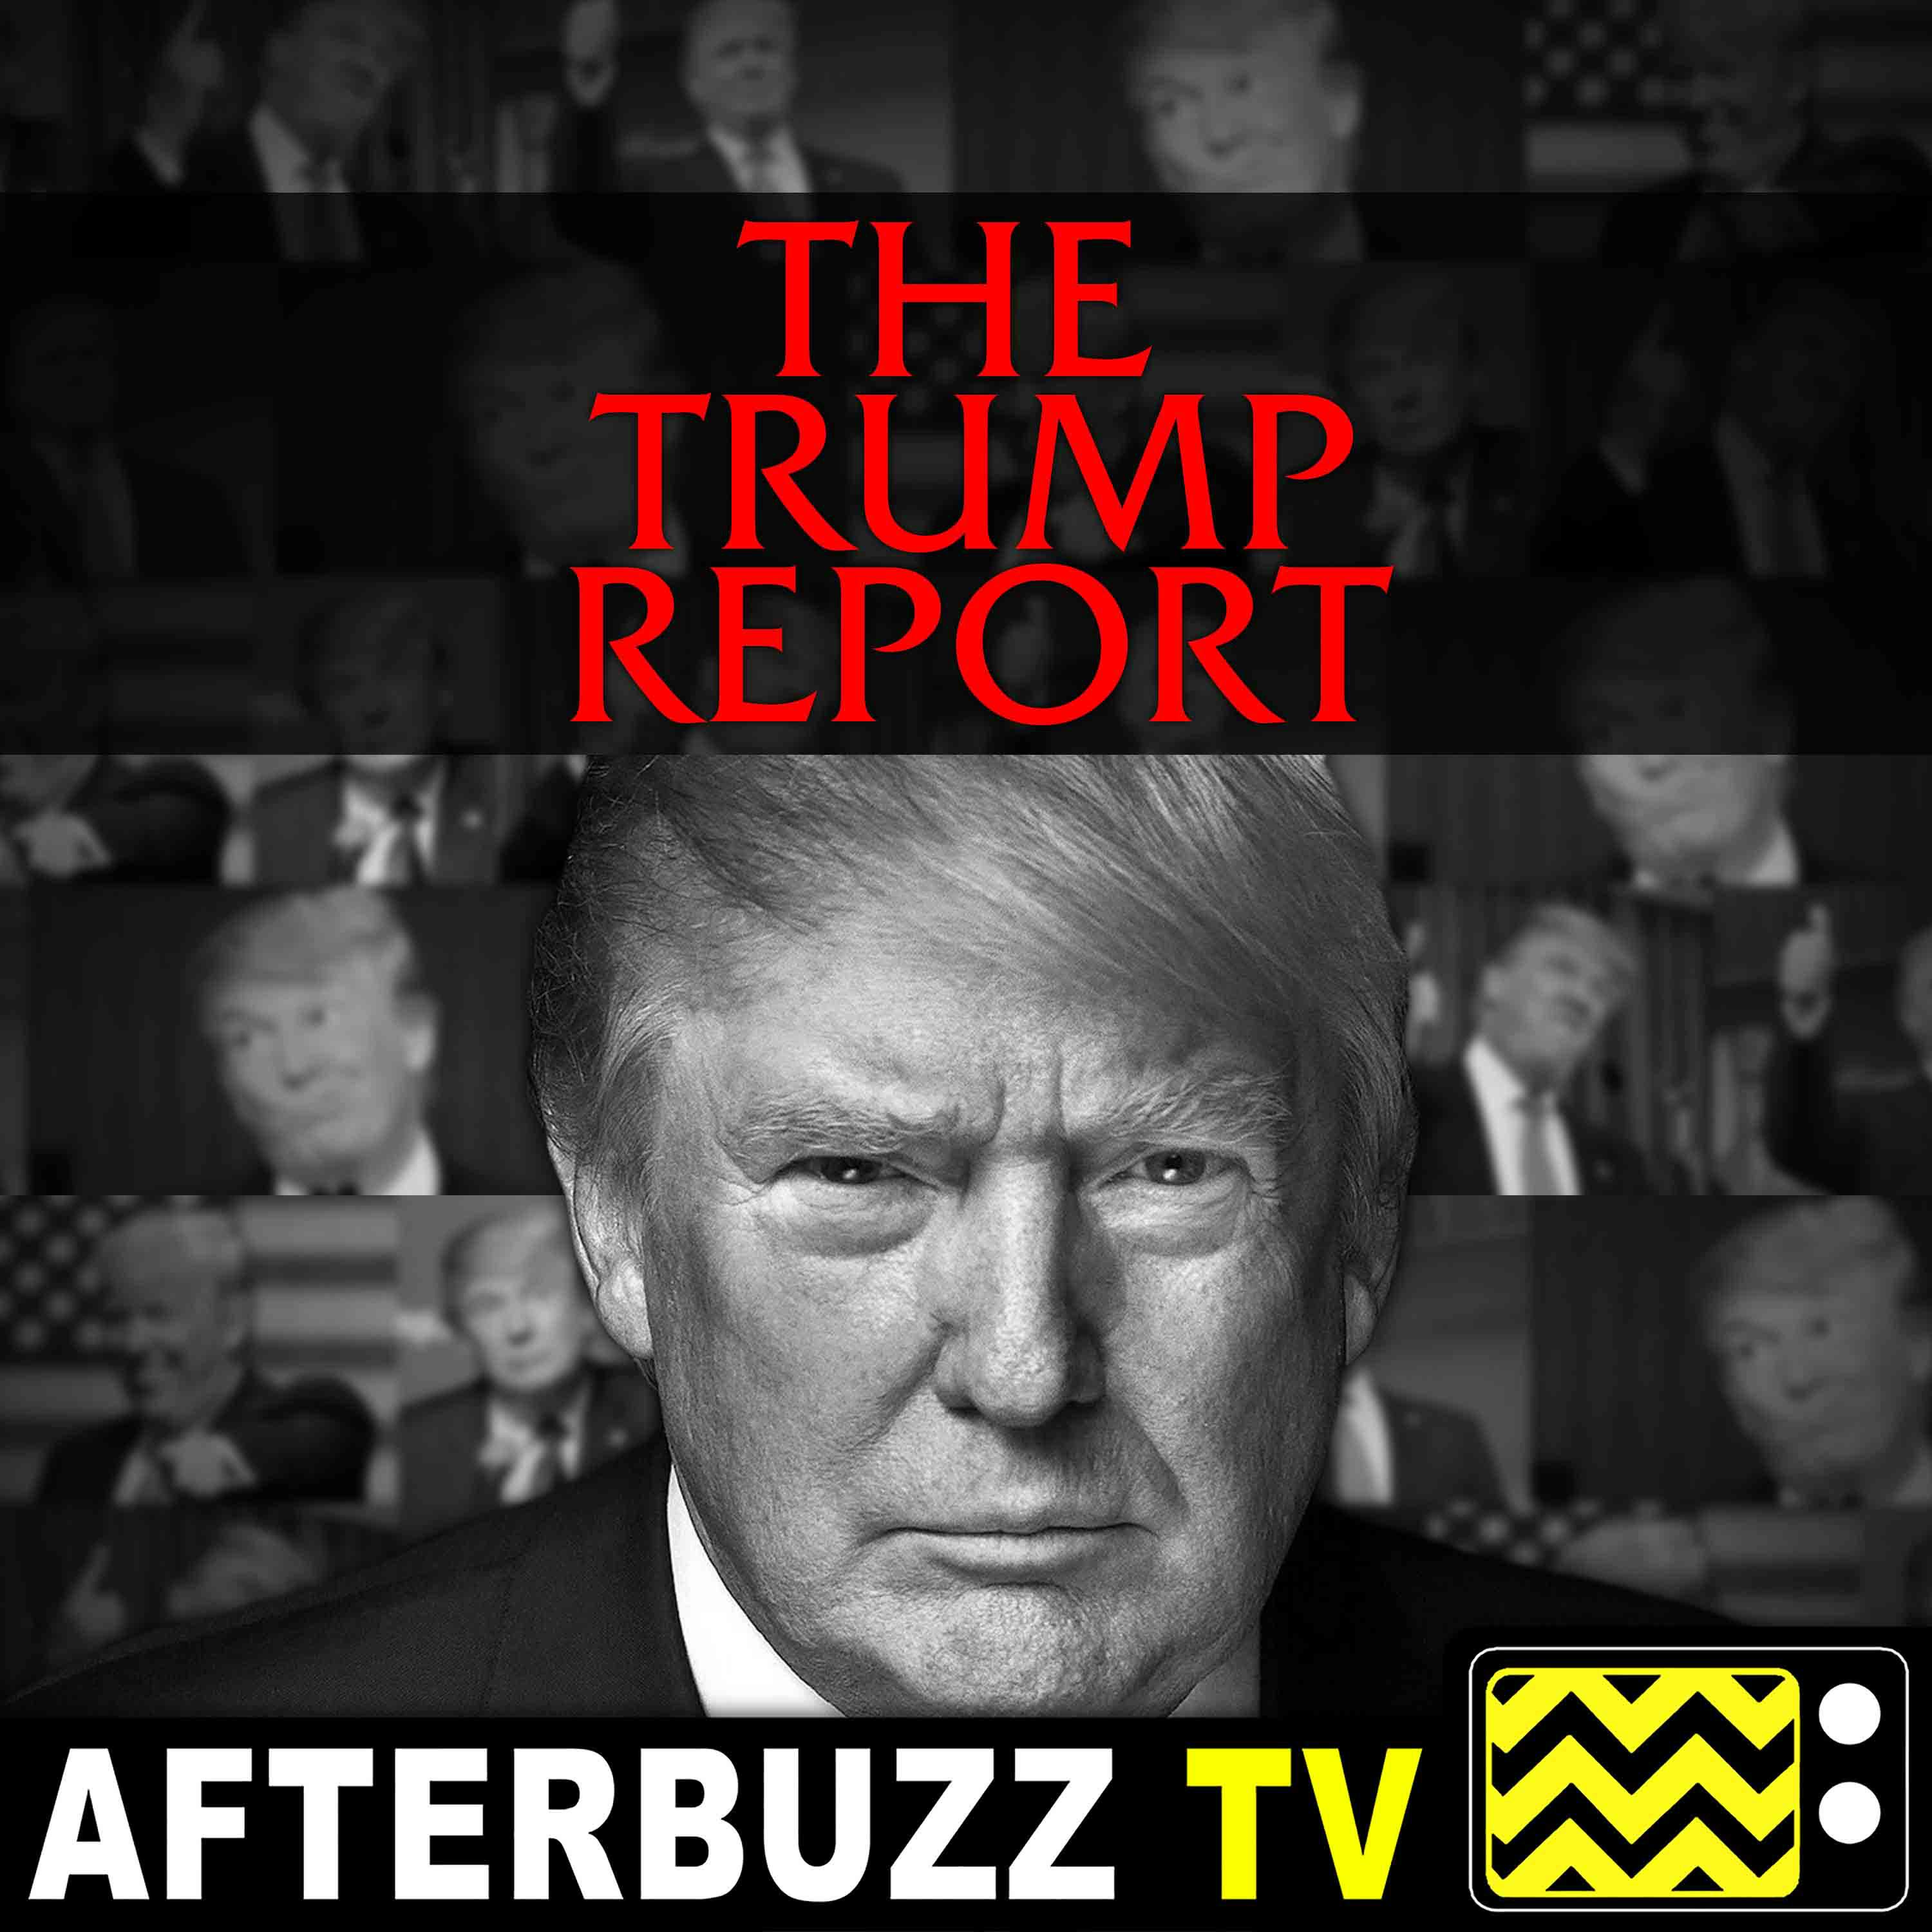 Working for the Clampdown | AfterBuzz TV’s The Trump Report